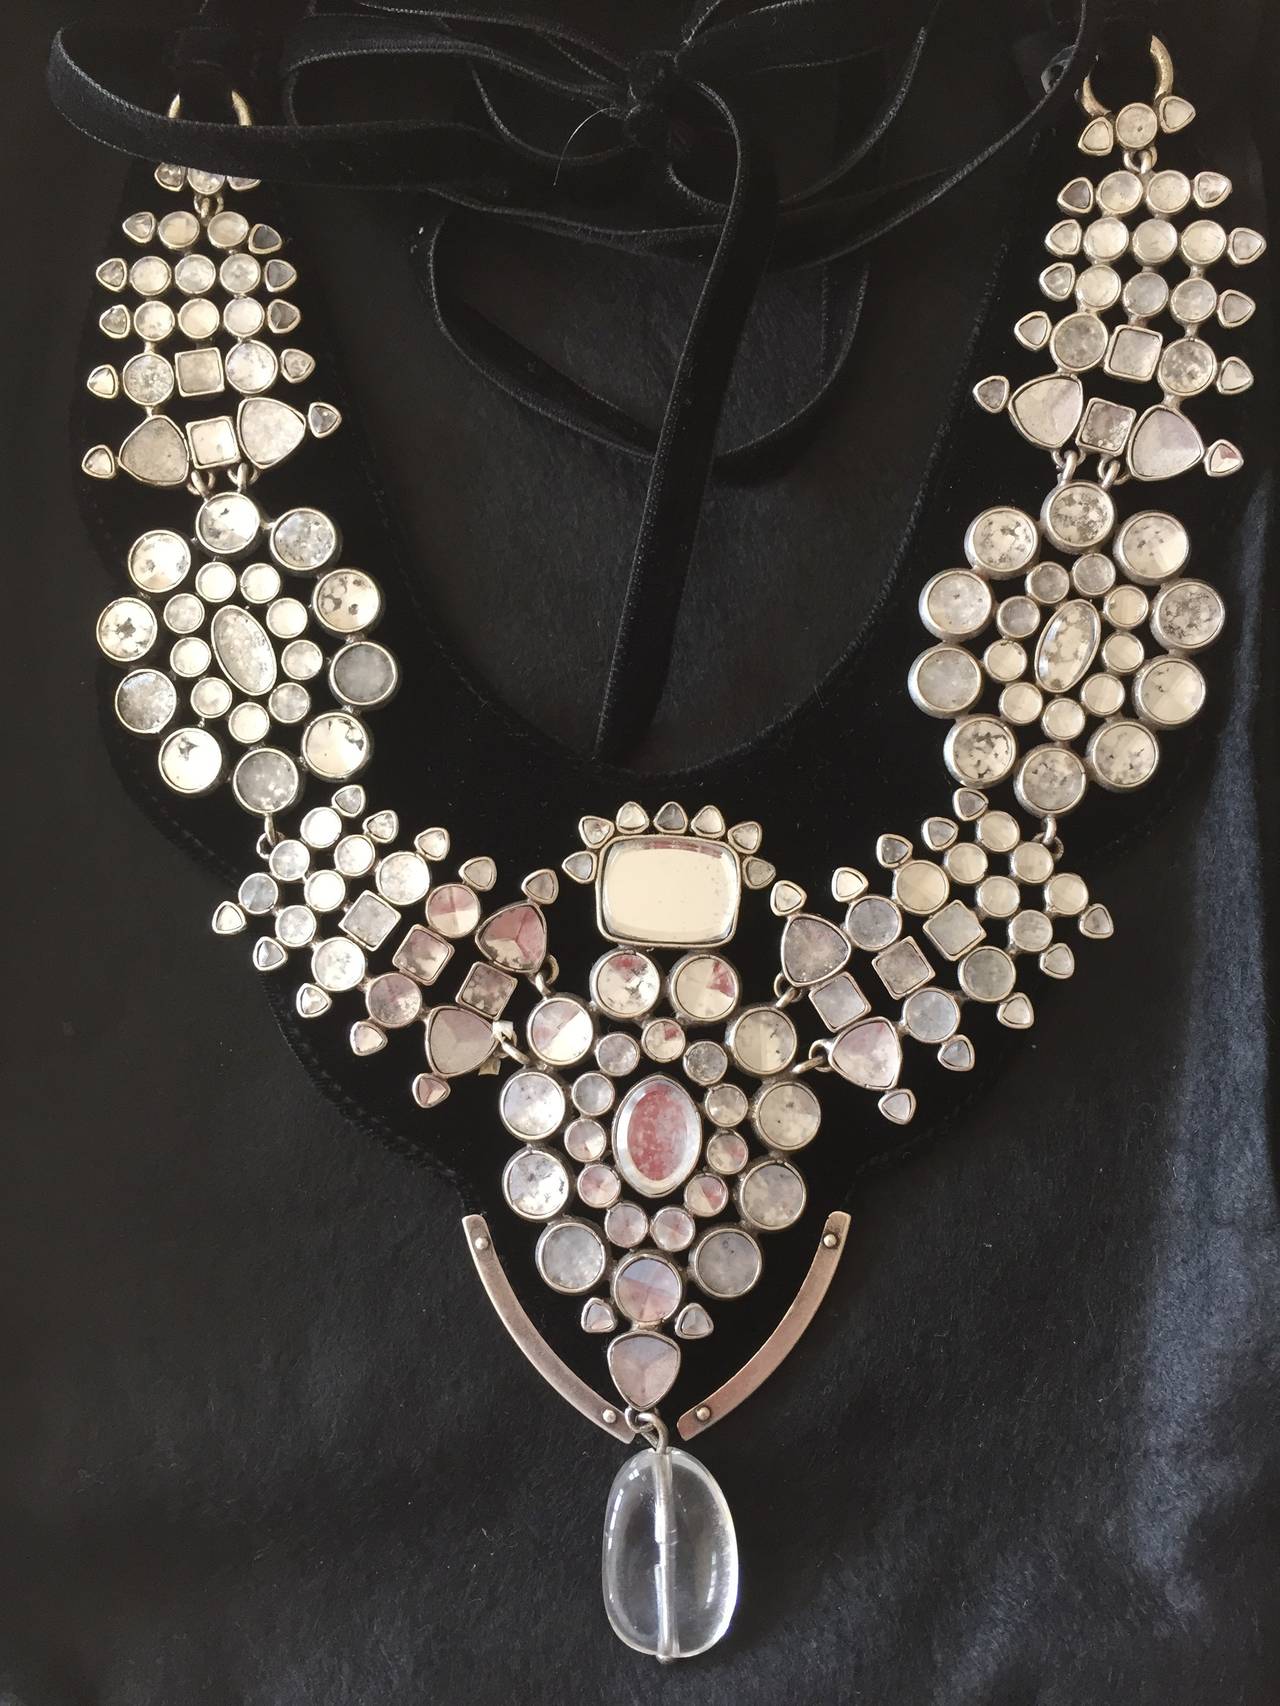 Yves Saint Laurent by Tom Ford 2002 Mughal Style Necklace at 1stDibs